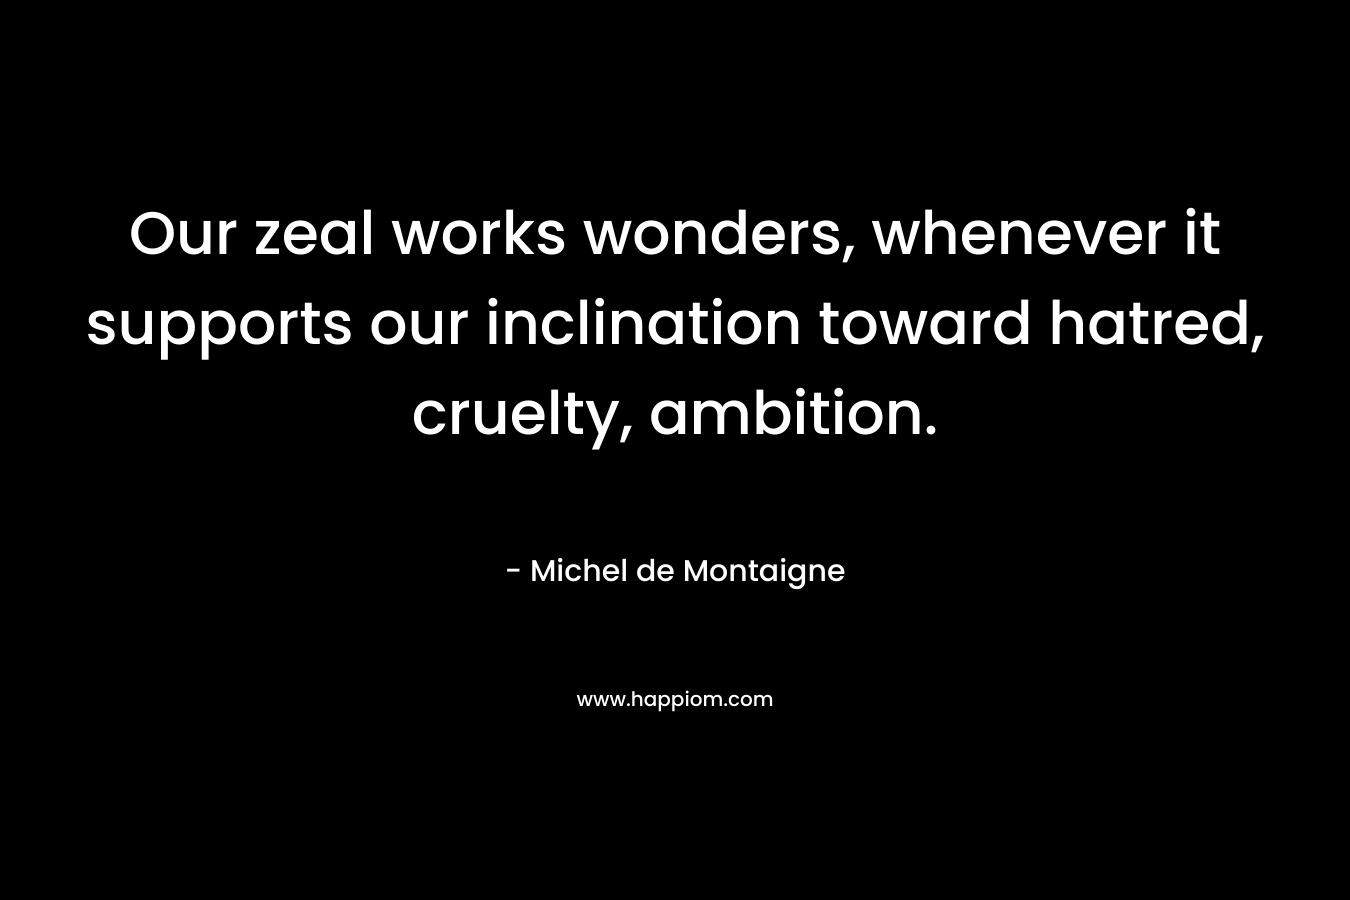 Our zeal works wonders, whenever it supports our inclination toward hatred, cruelty, ambition. – Michel de Montaigne